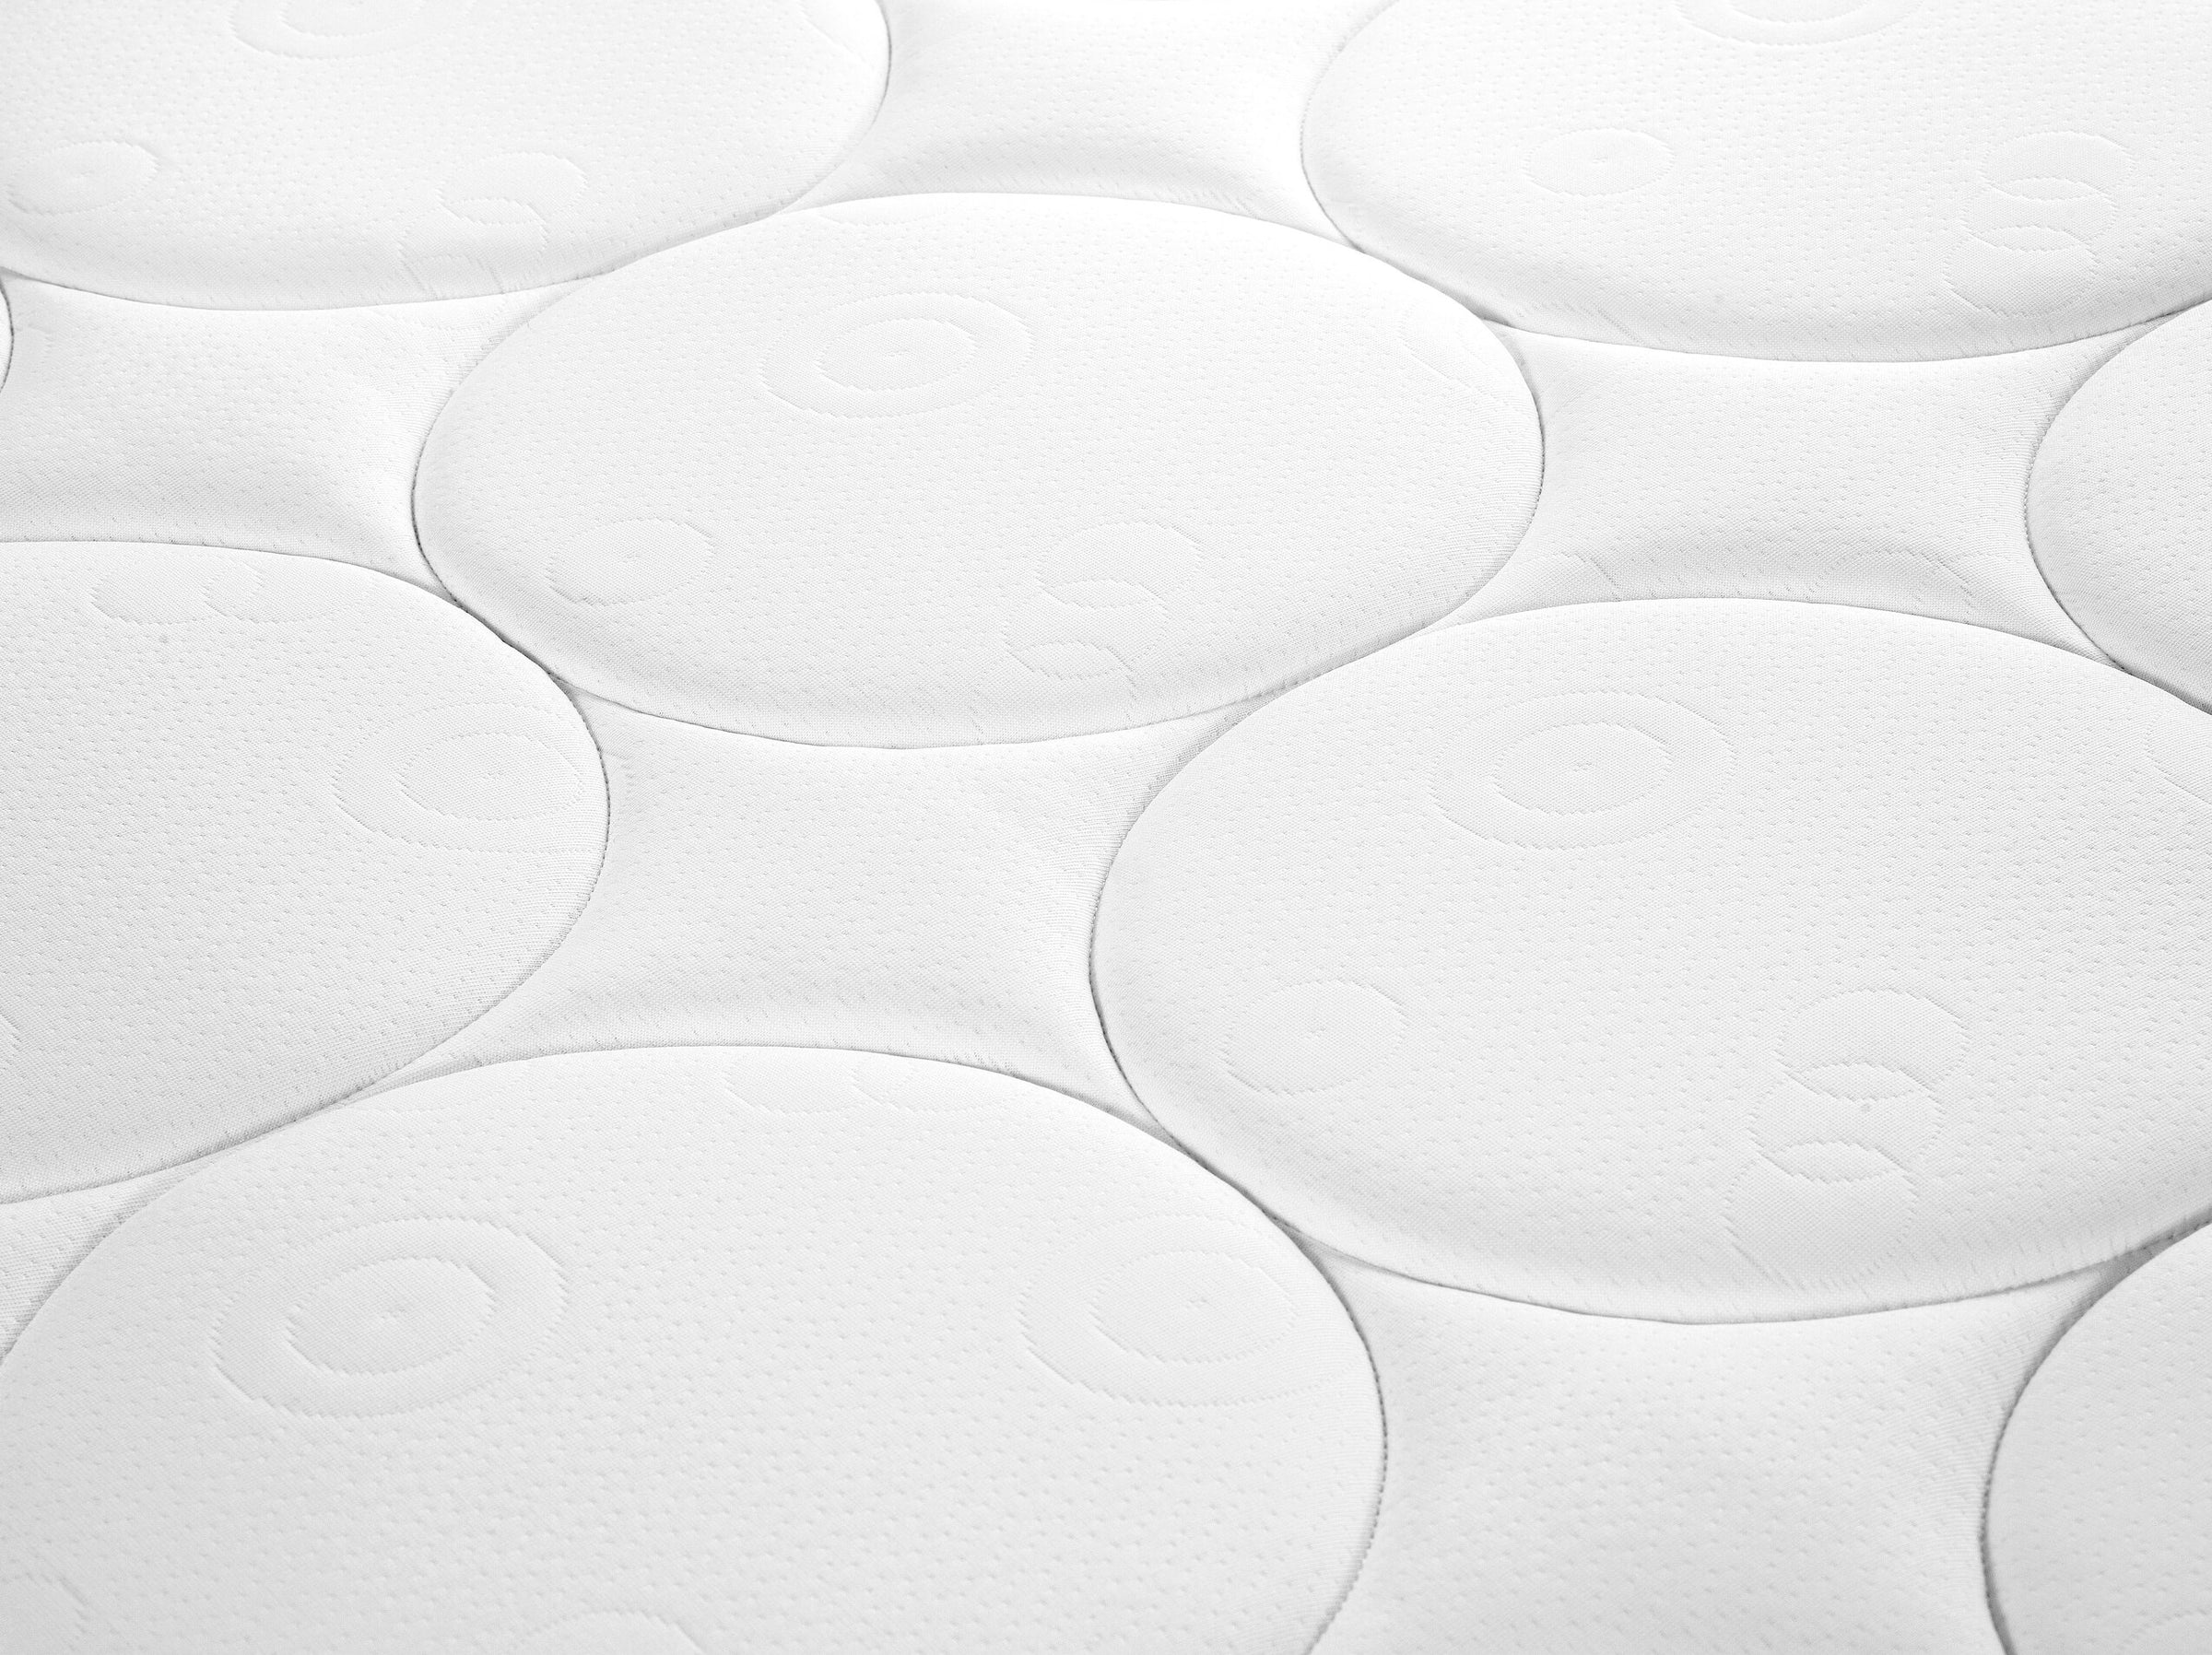 Kavaja beds & mattresses structured fabric white and blue